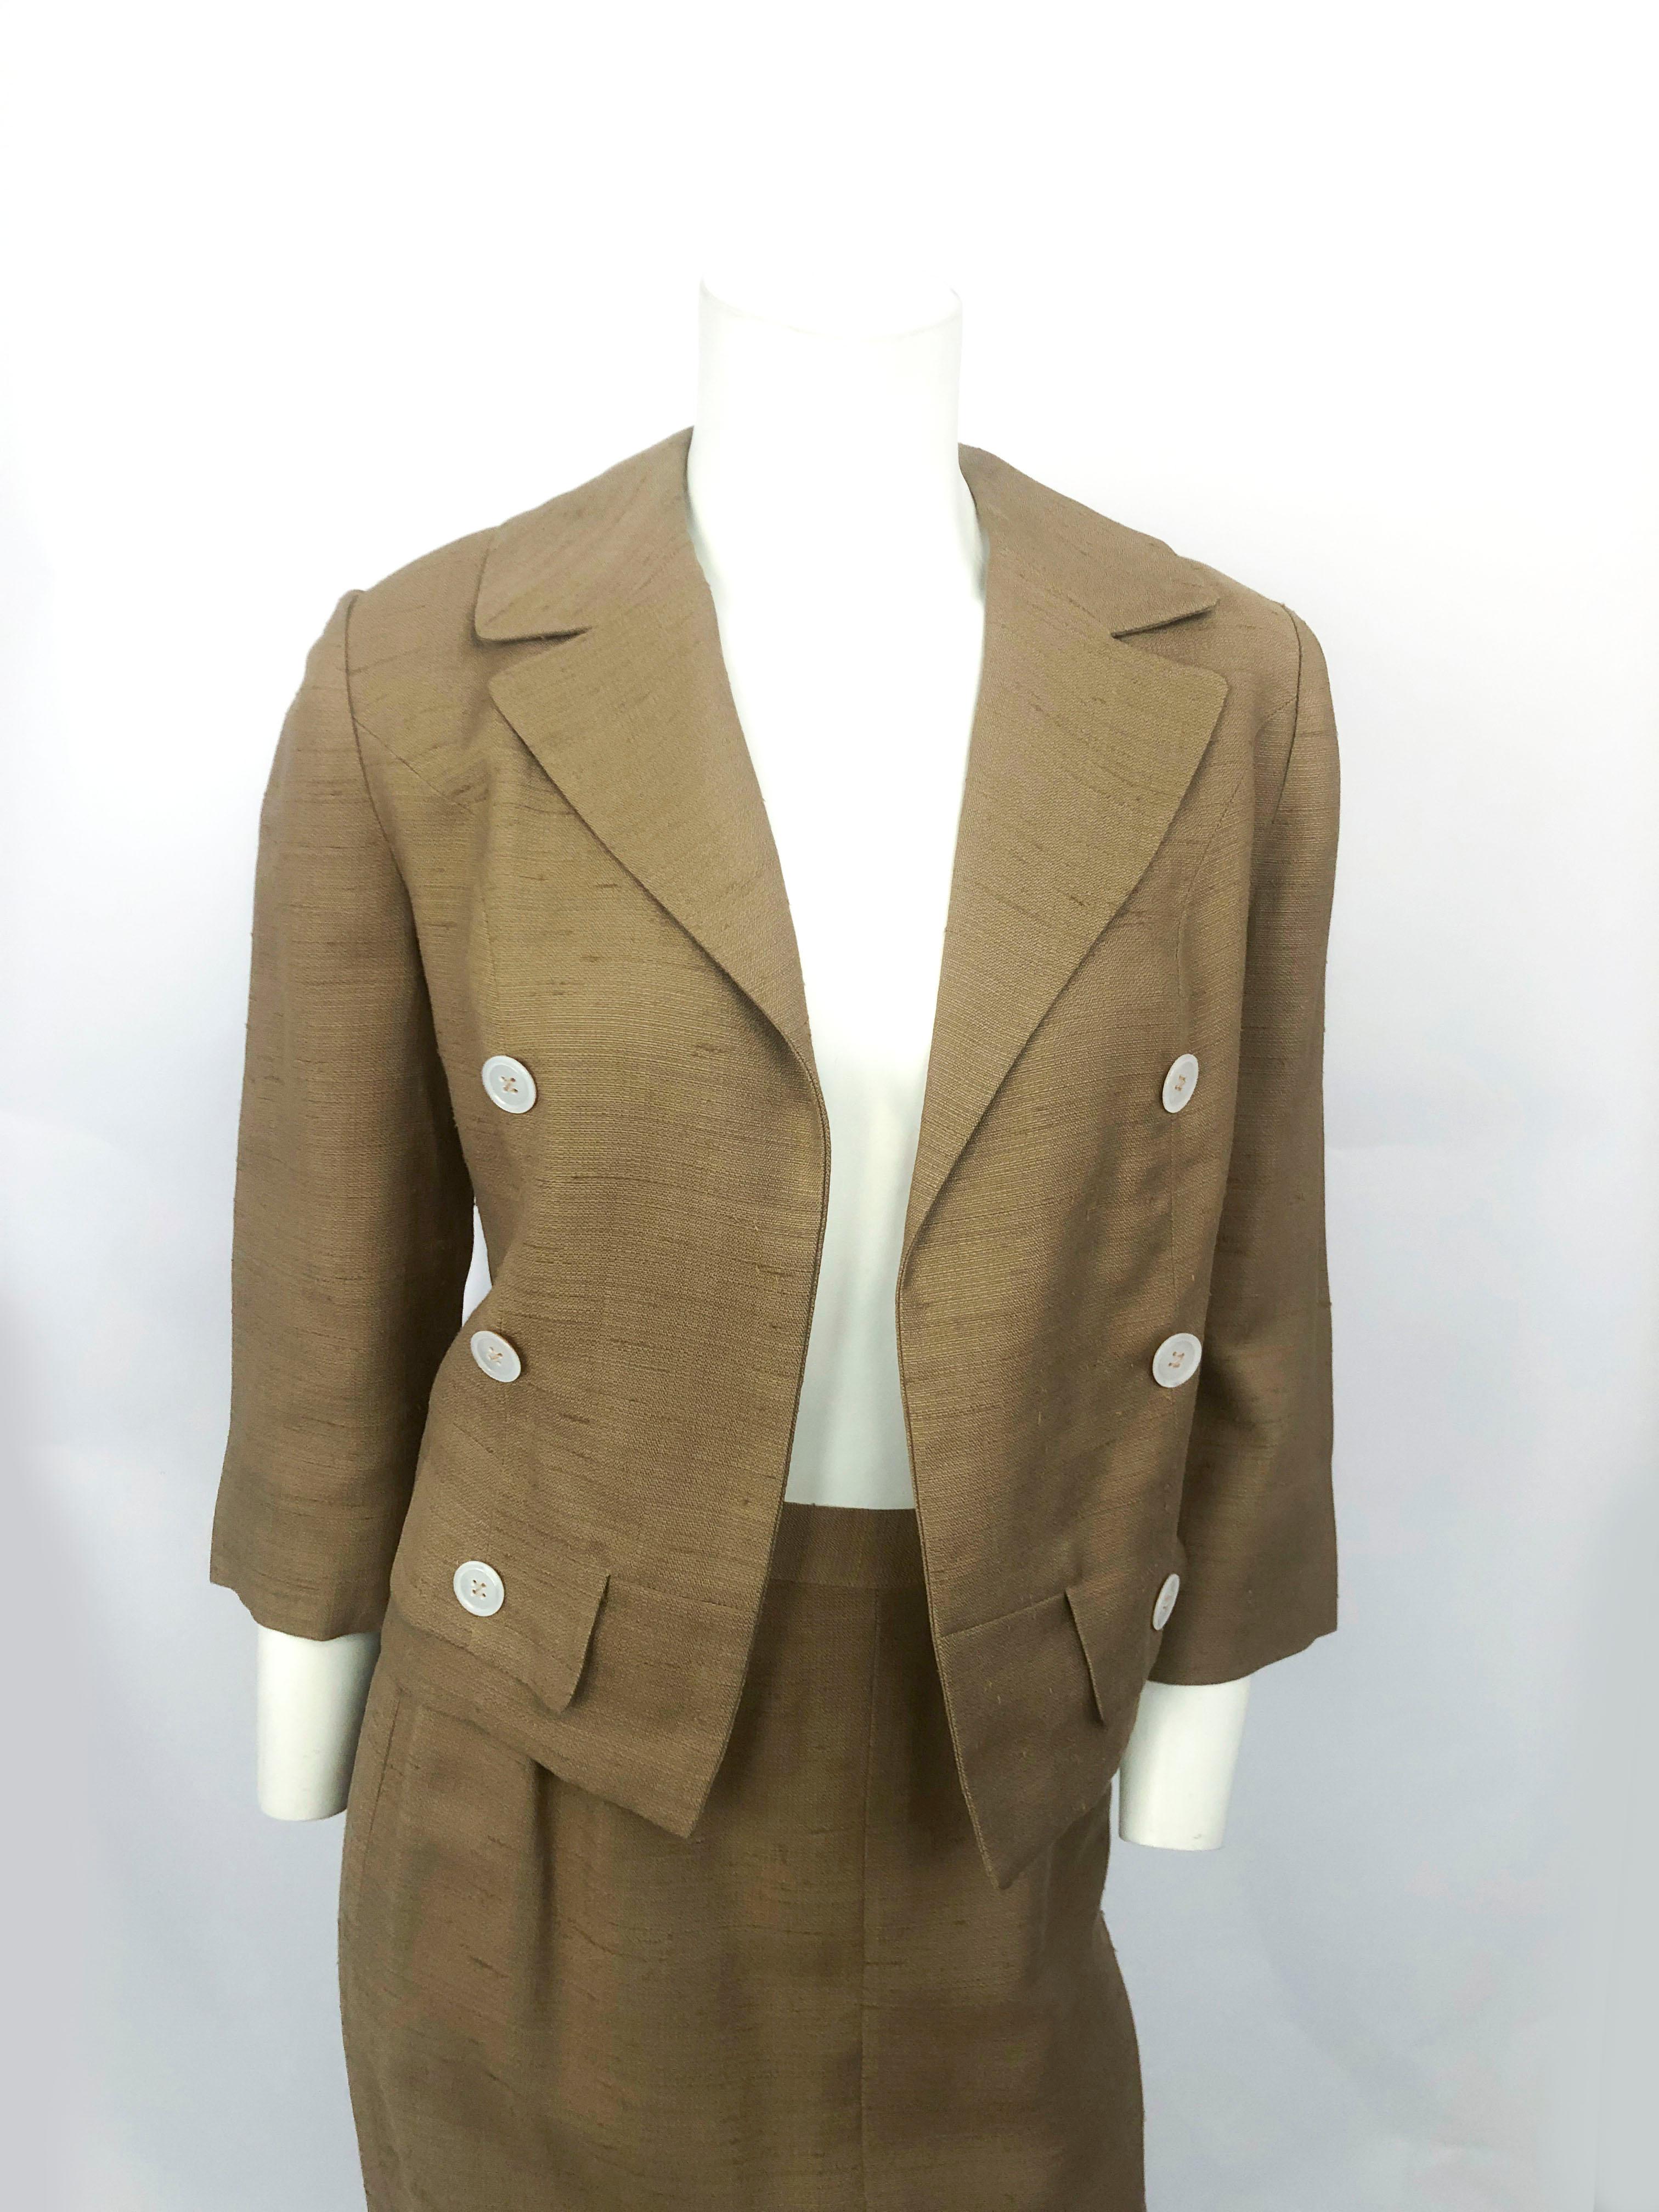 Late 1950s to early 1960s muted gold I. Magnin raw silk suit with abalone shell buttons, peak lapel collar, faux pockets, and glove-length sleeves. The jacket is bolero style. The skirt has a straight silhouette and has a zip closure along the side.